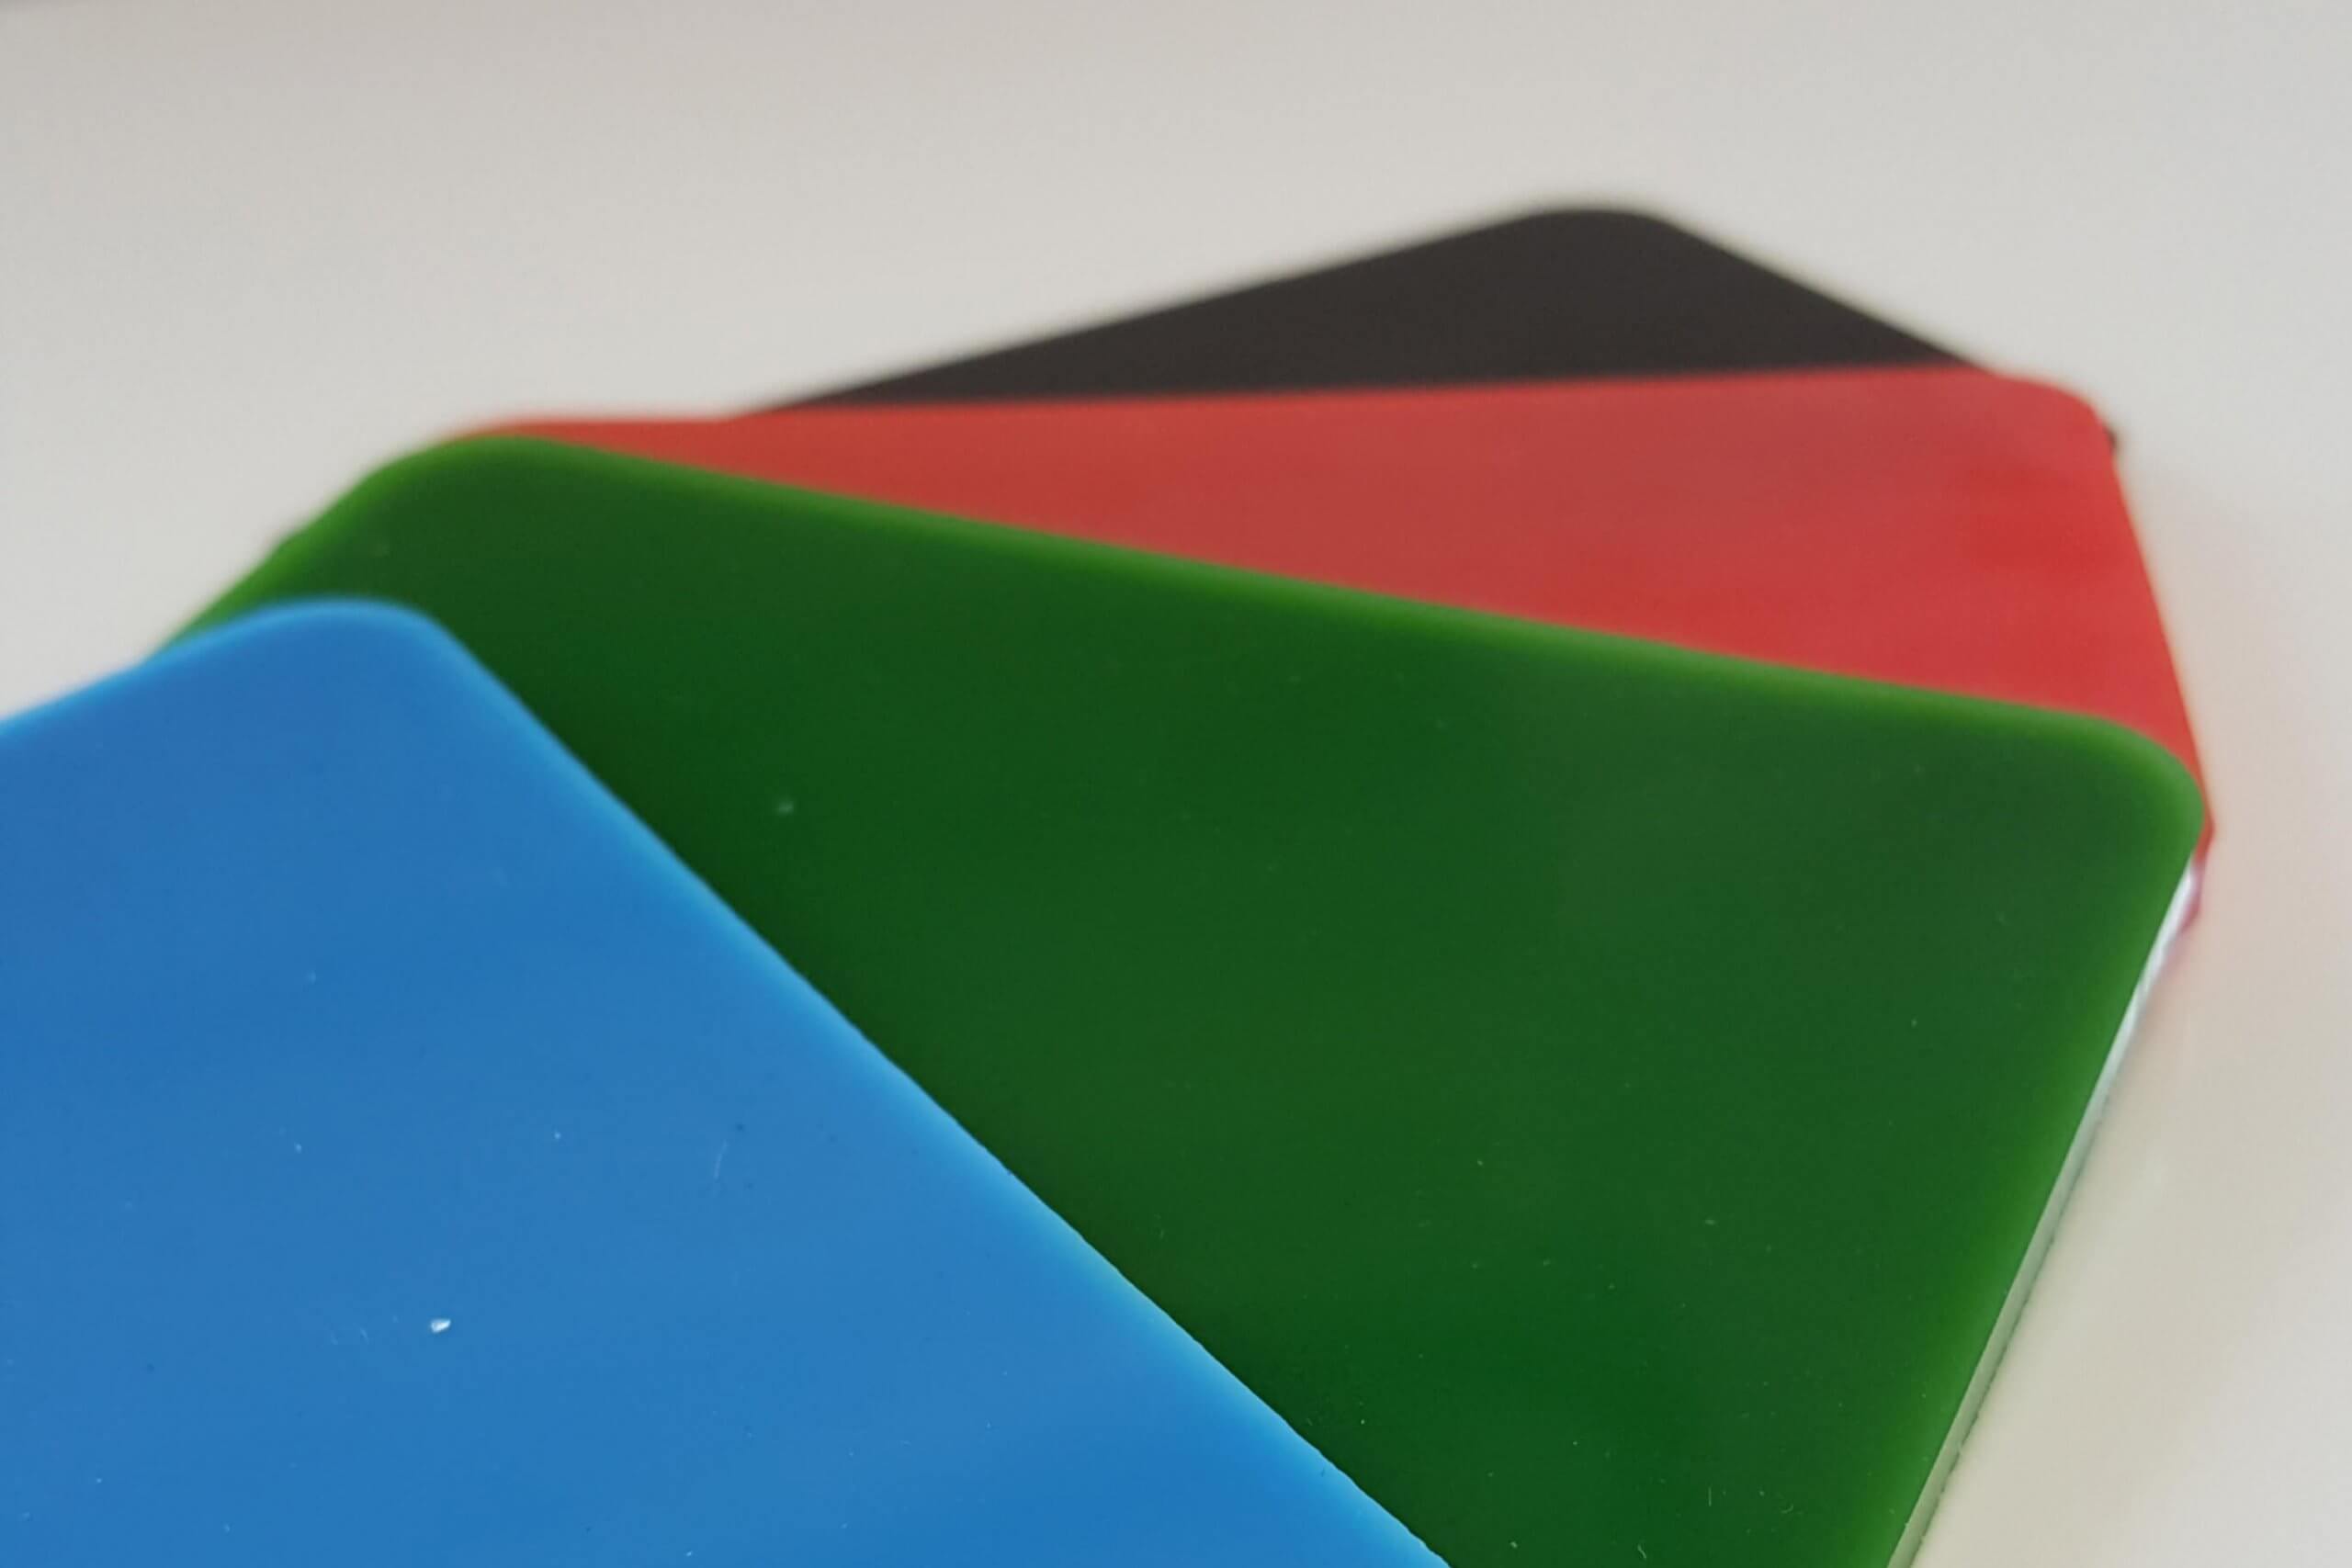 examples of quality polyurethane sheets